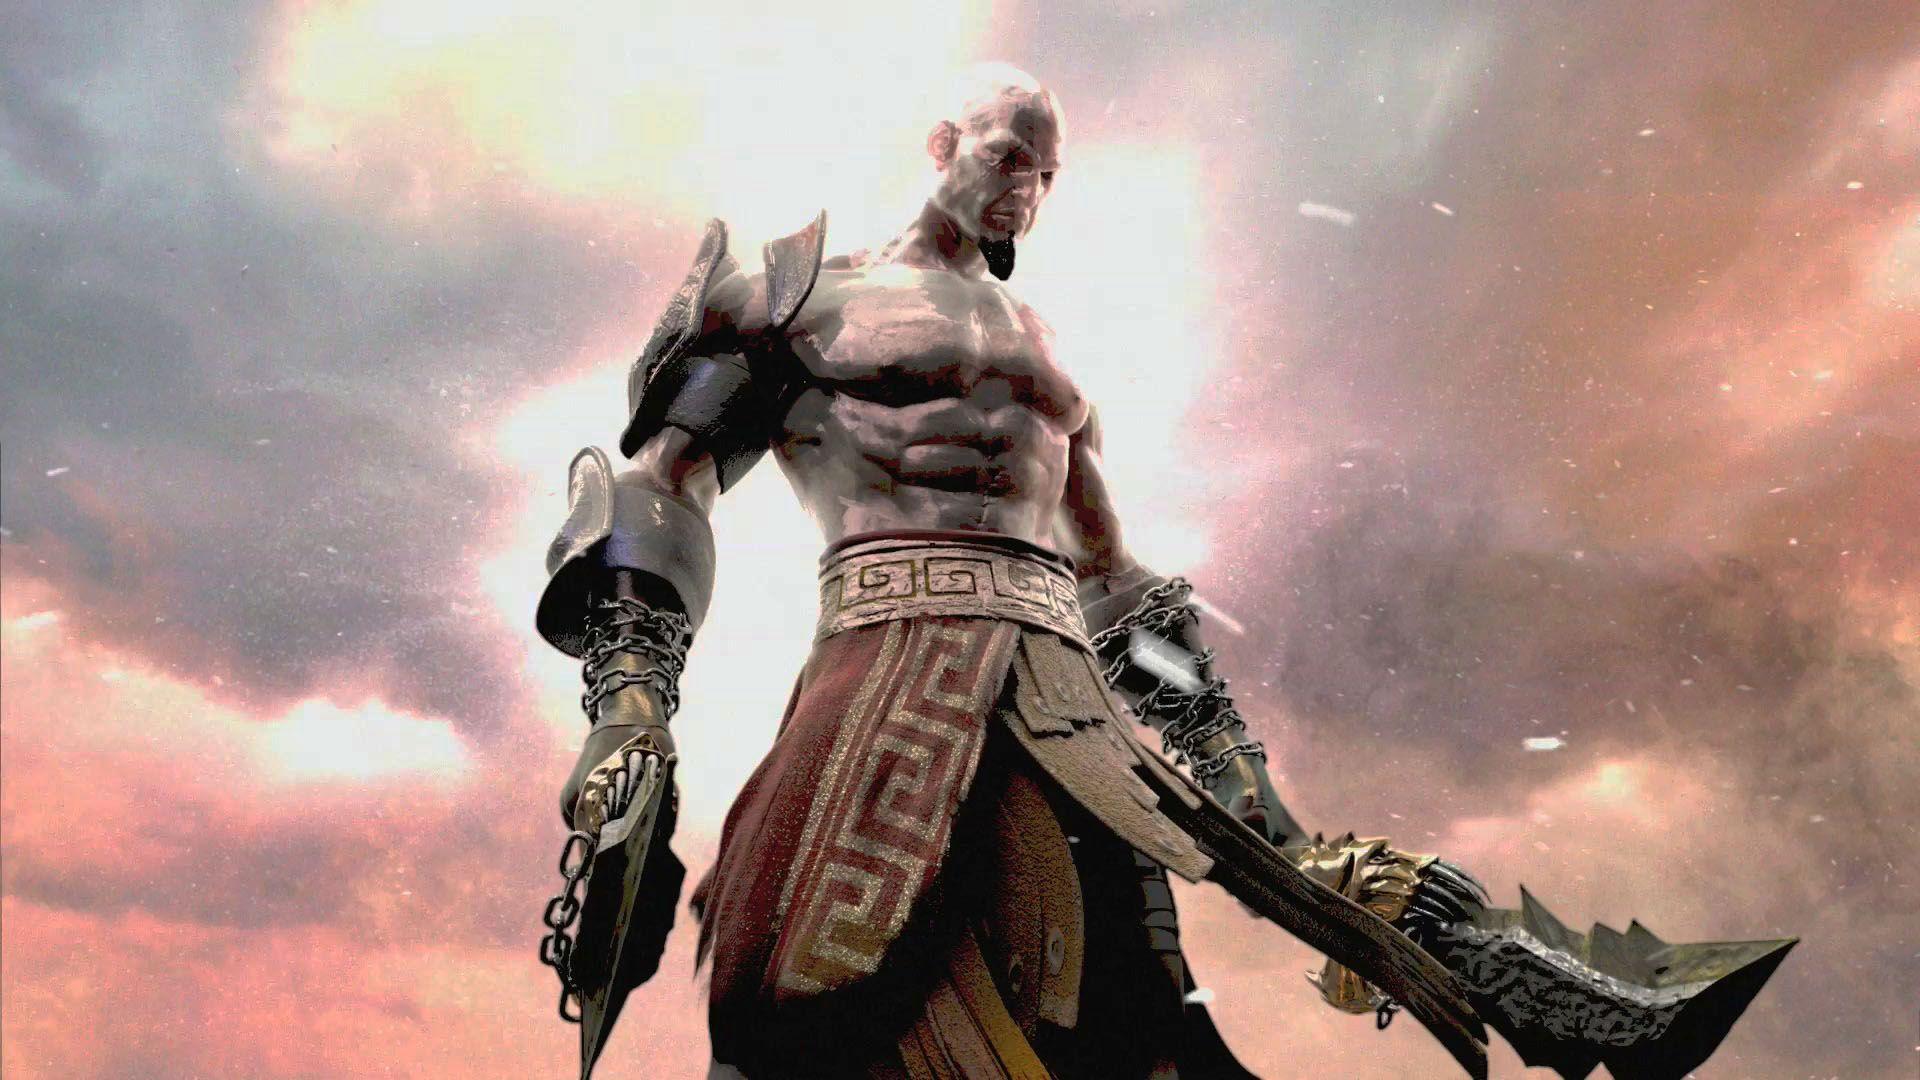 God Of War 3 Kratos Wallpaper For Android #iSP